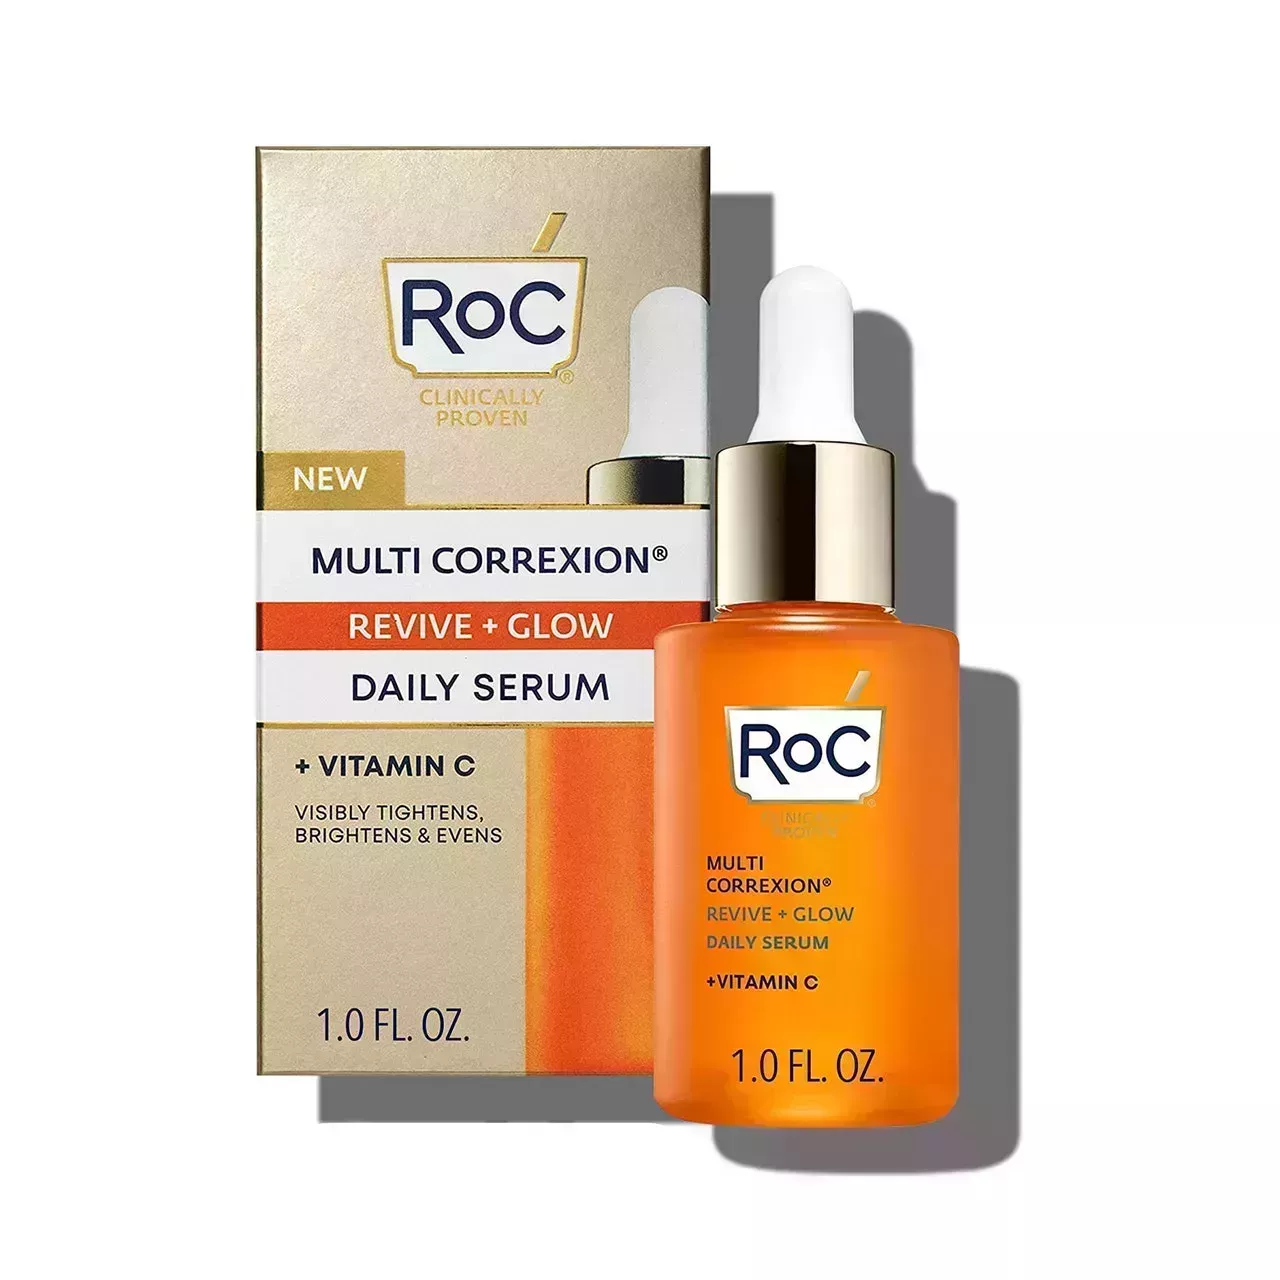 RoC Multi Correxion Revive + Glow Vitamin C Serum orange serum bottle with gold and white dropper cap and gold box on white background